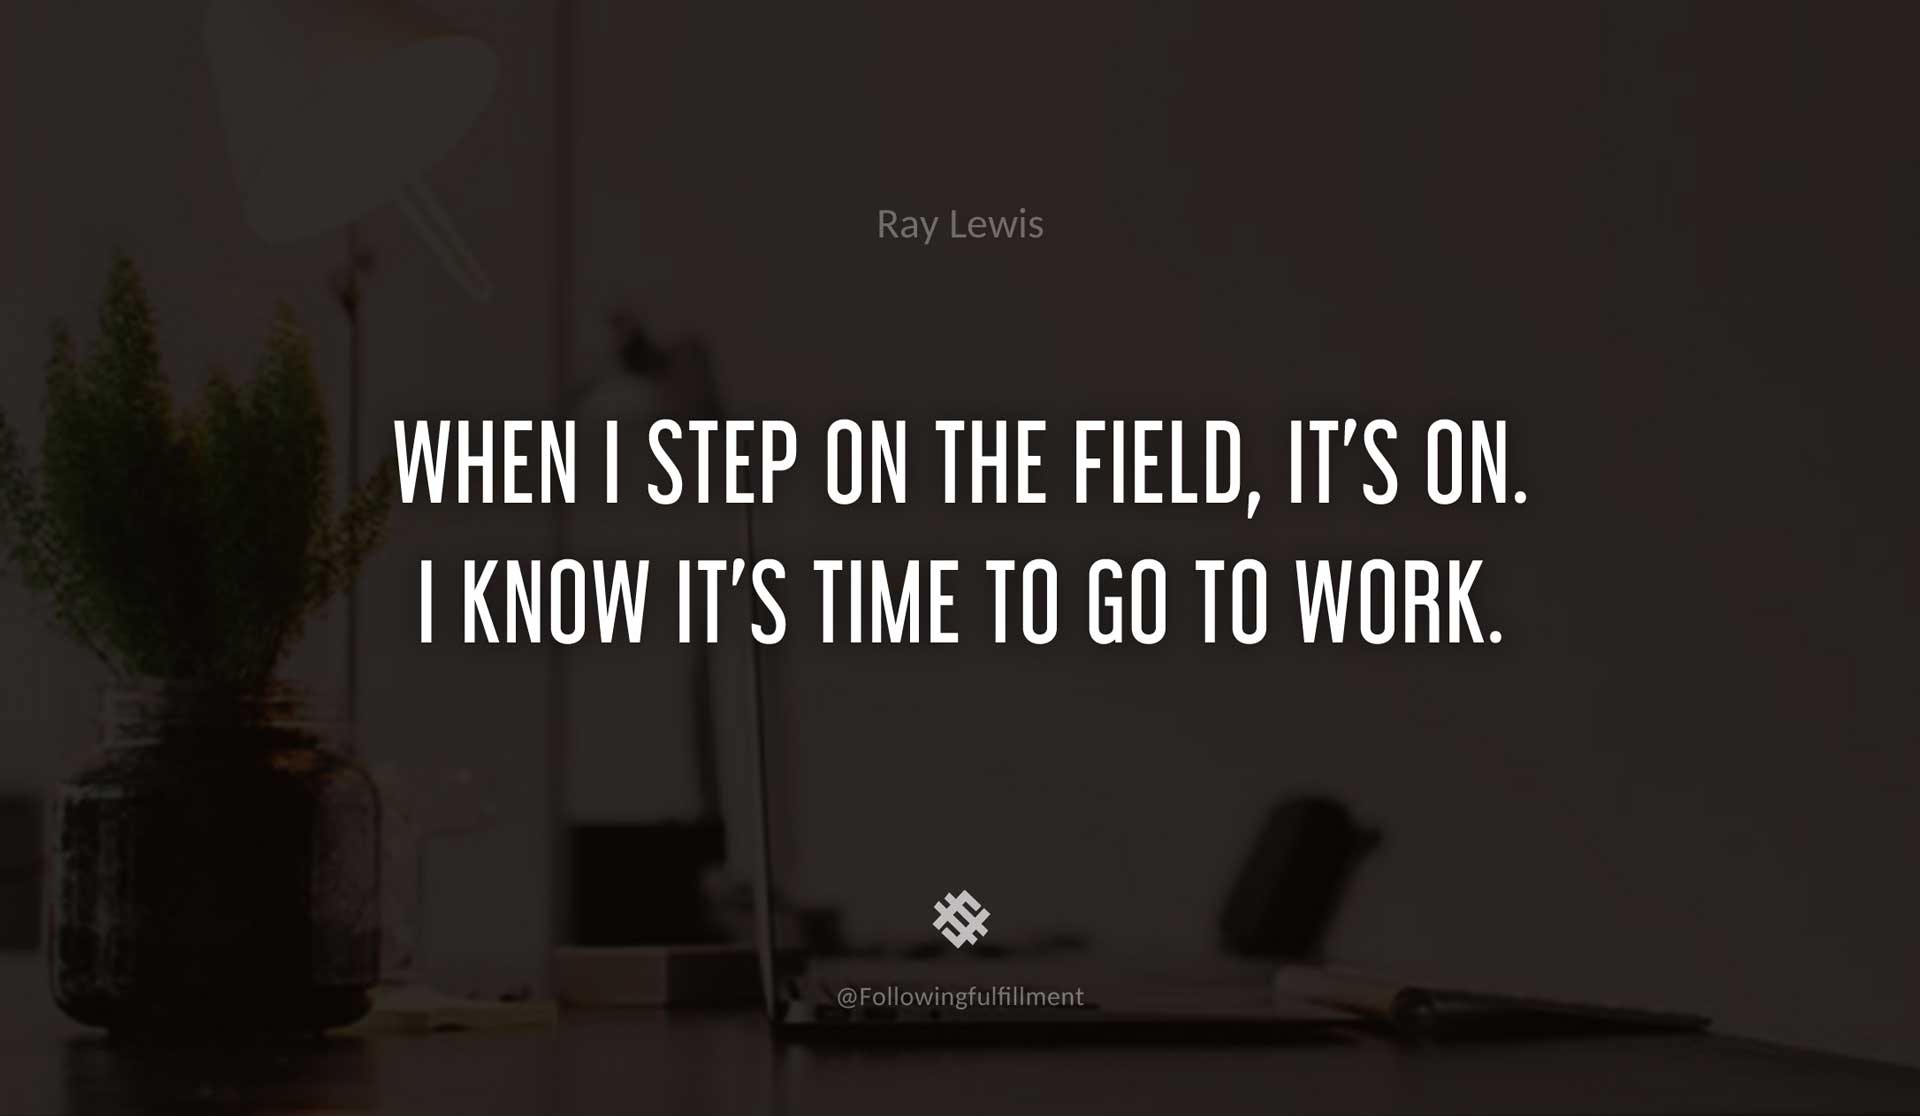 When-I-step-on-the-field,-it's-on.-I-know-it's-time-to-go-to-work.-RAY-LEWIS-Quote.jpg